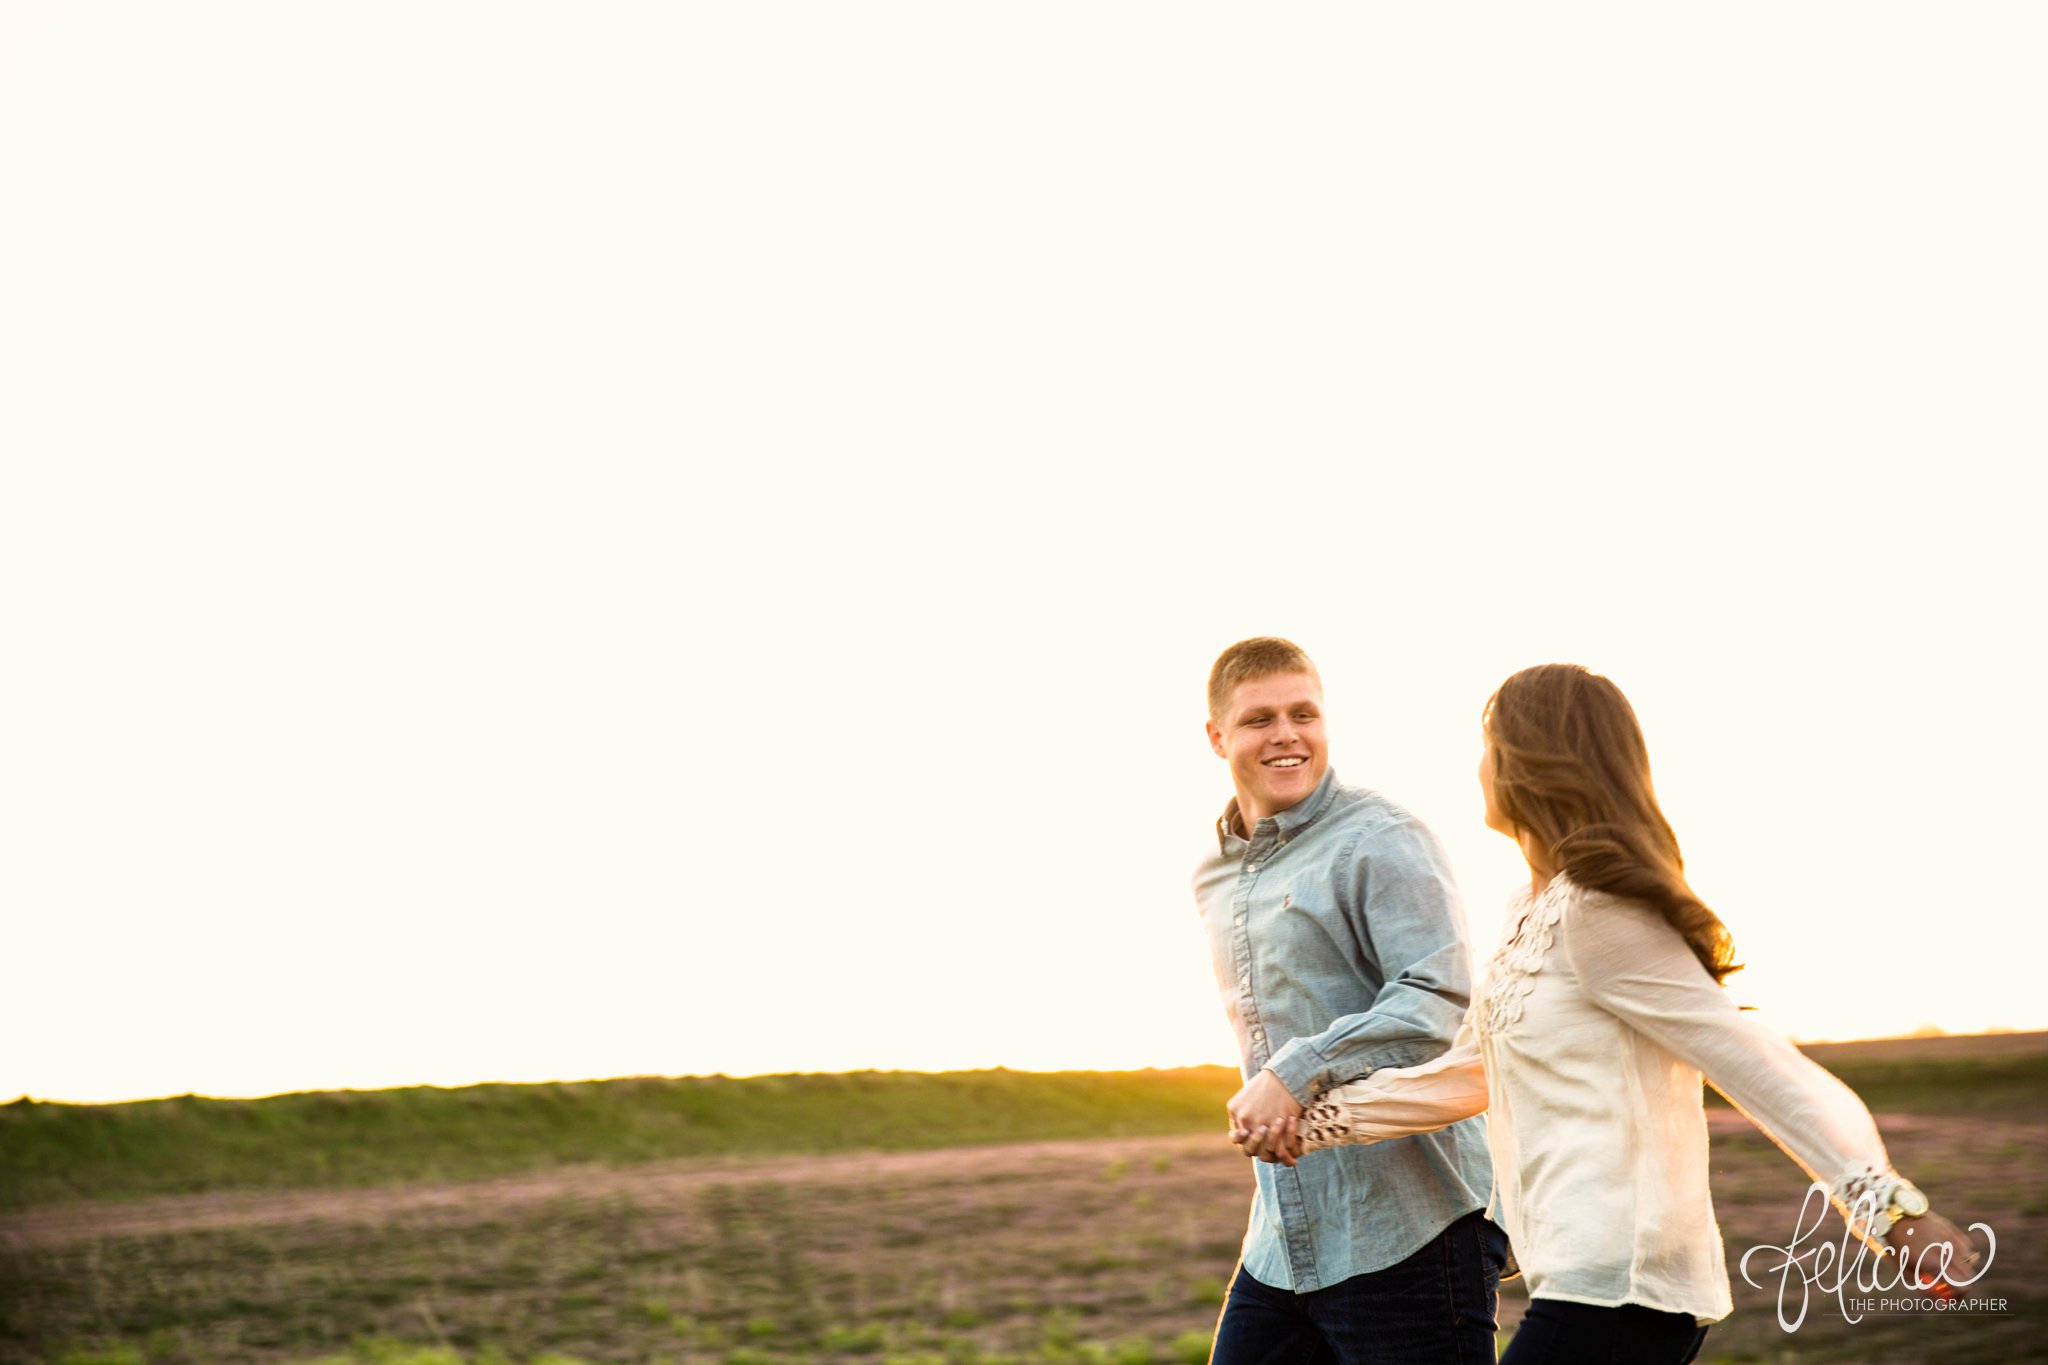 Romantic Engagement Photography | Kansas City, MO | Field Candids| Images by www.feliciathephotographer.com